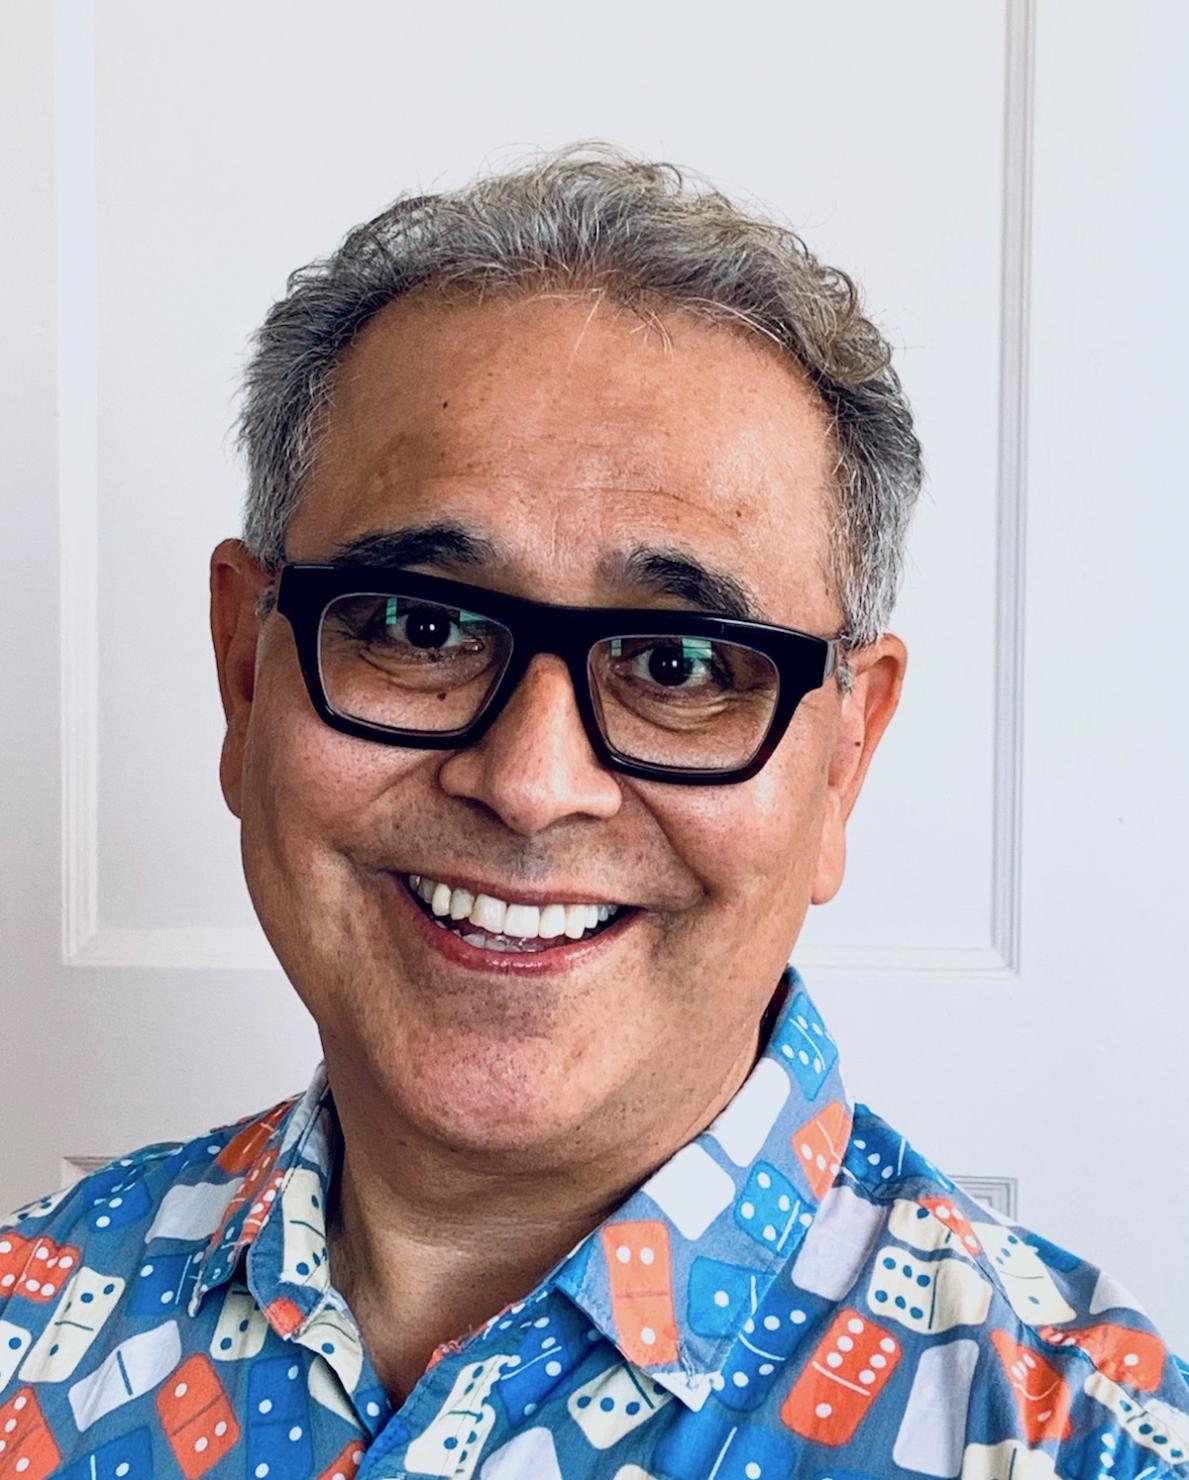 Photographic color portrait of a man. He is wearing thick framed glasses and a brightly colored shirt and smiling directly at the camera.